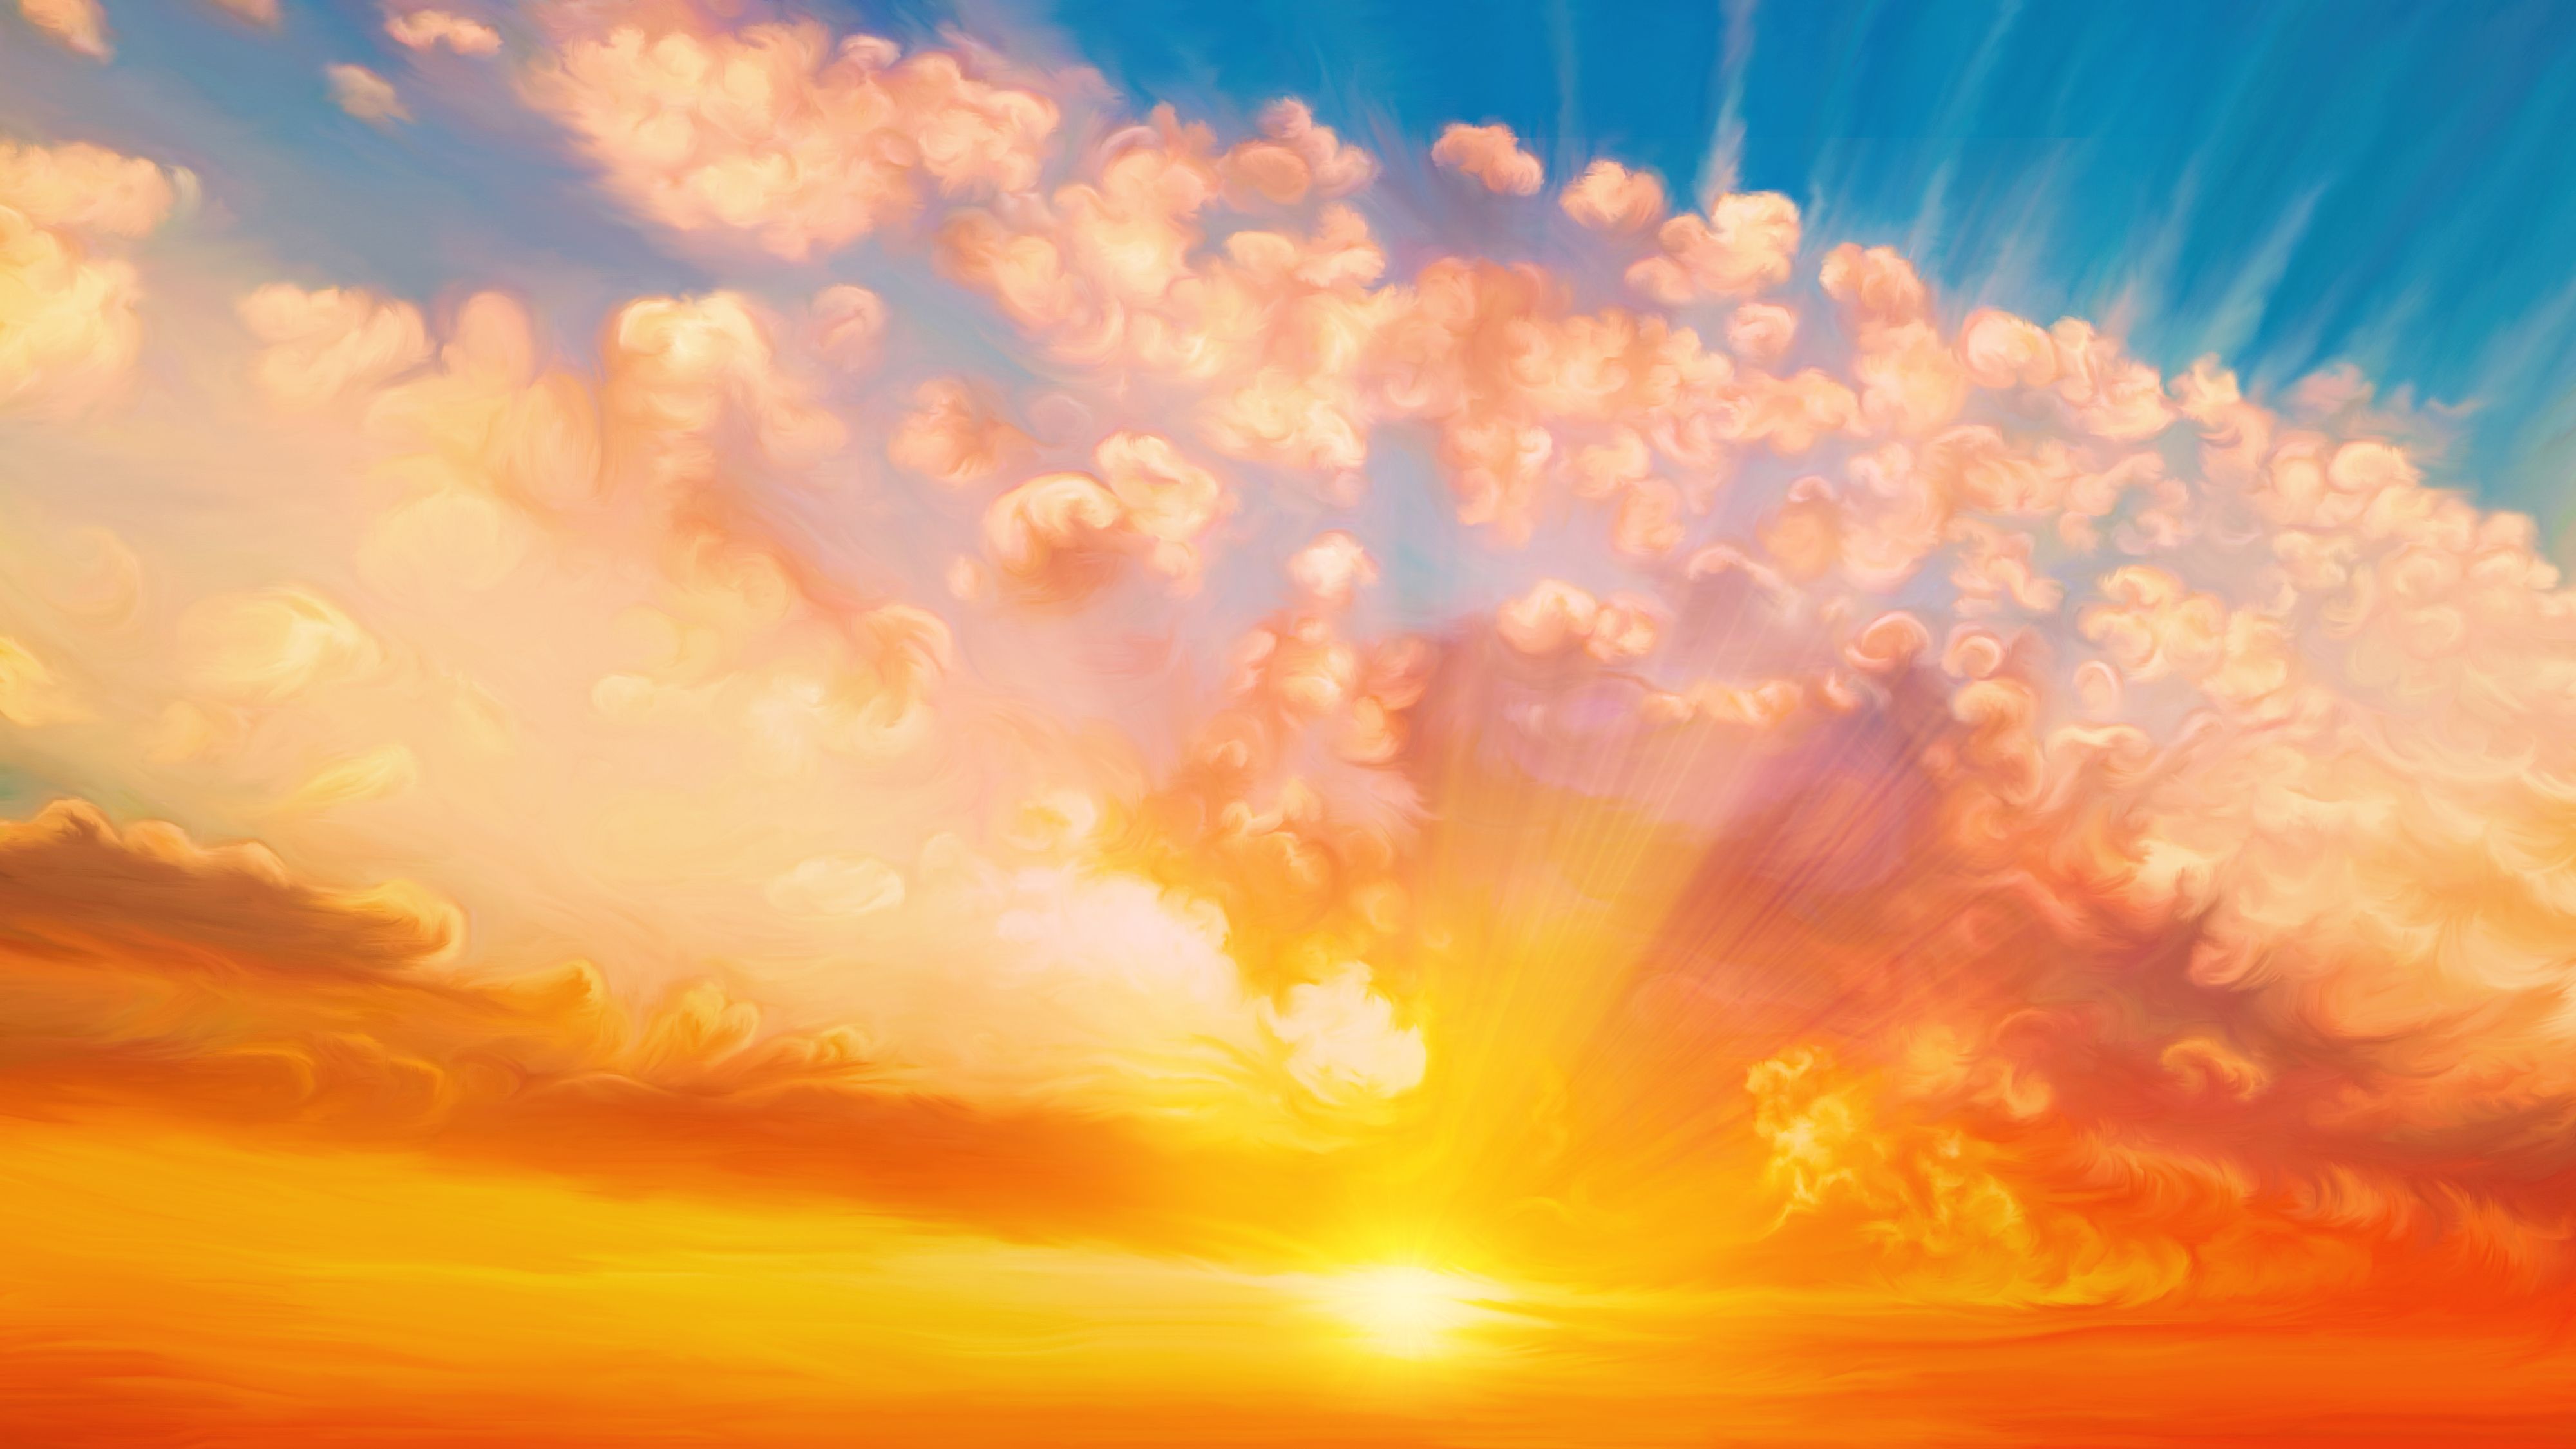 image Sun Nature Sunrises and sunsets Clouds Painting Art 4000x2250